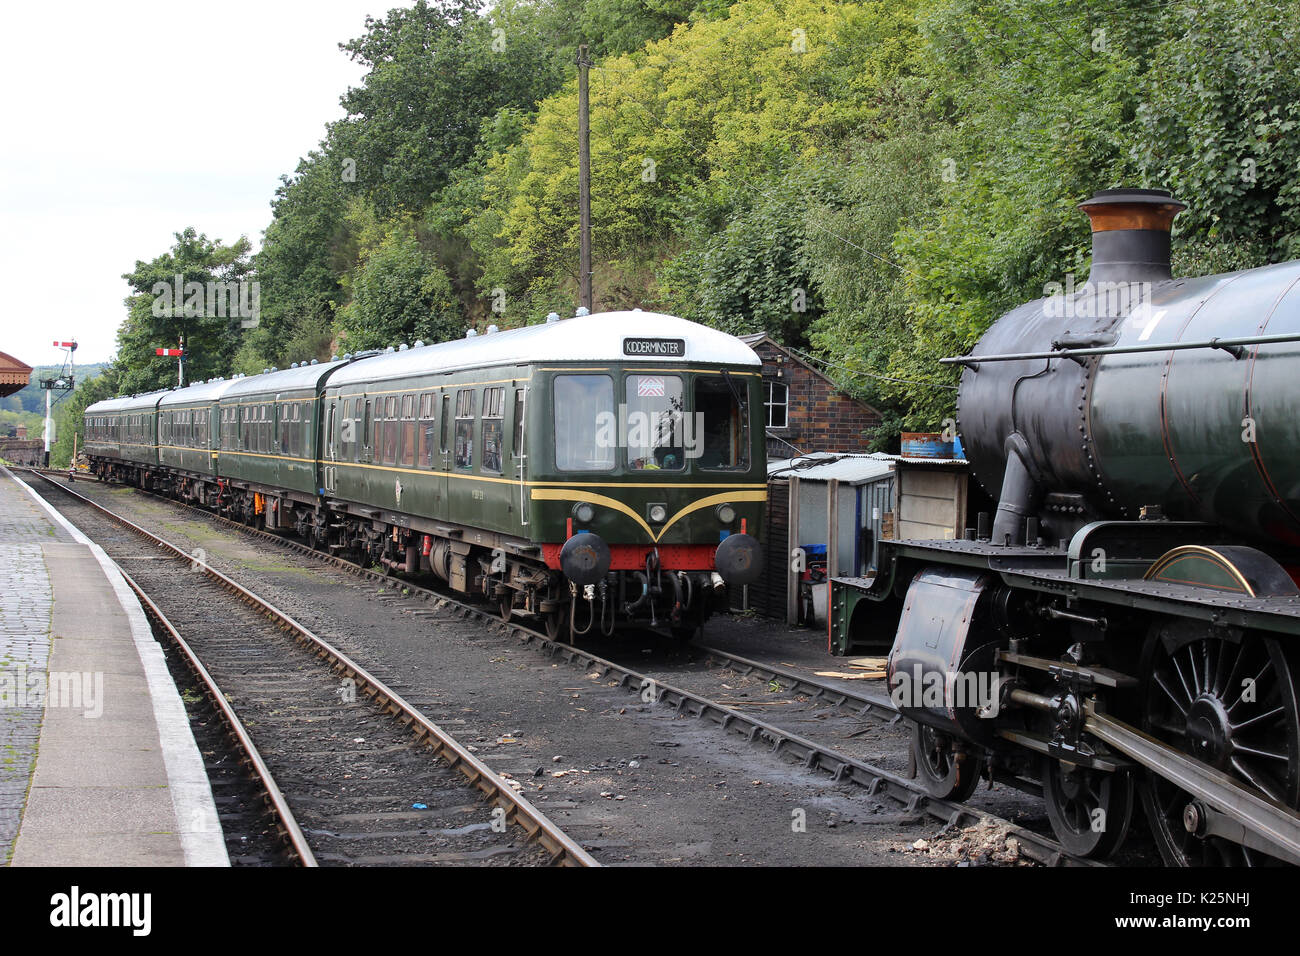 Two preserved heritage diesel multiple unit trains in BR green livery and steam train at Bewdley railway station on the Severn Valley Railway, England Stock Photo